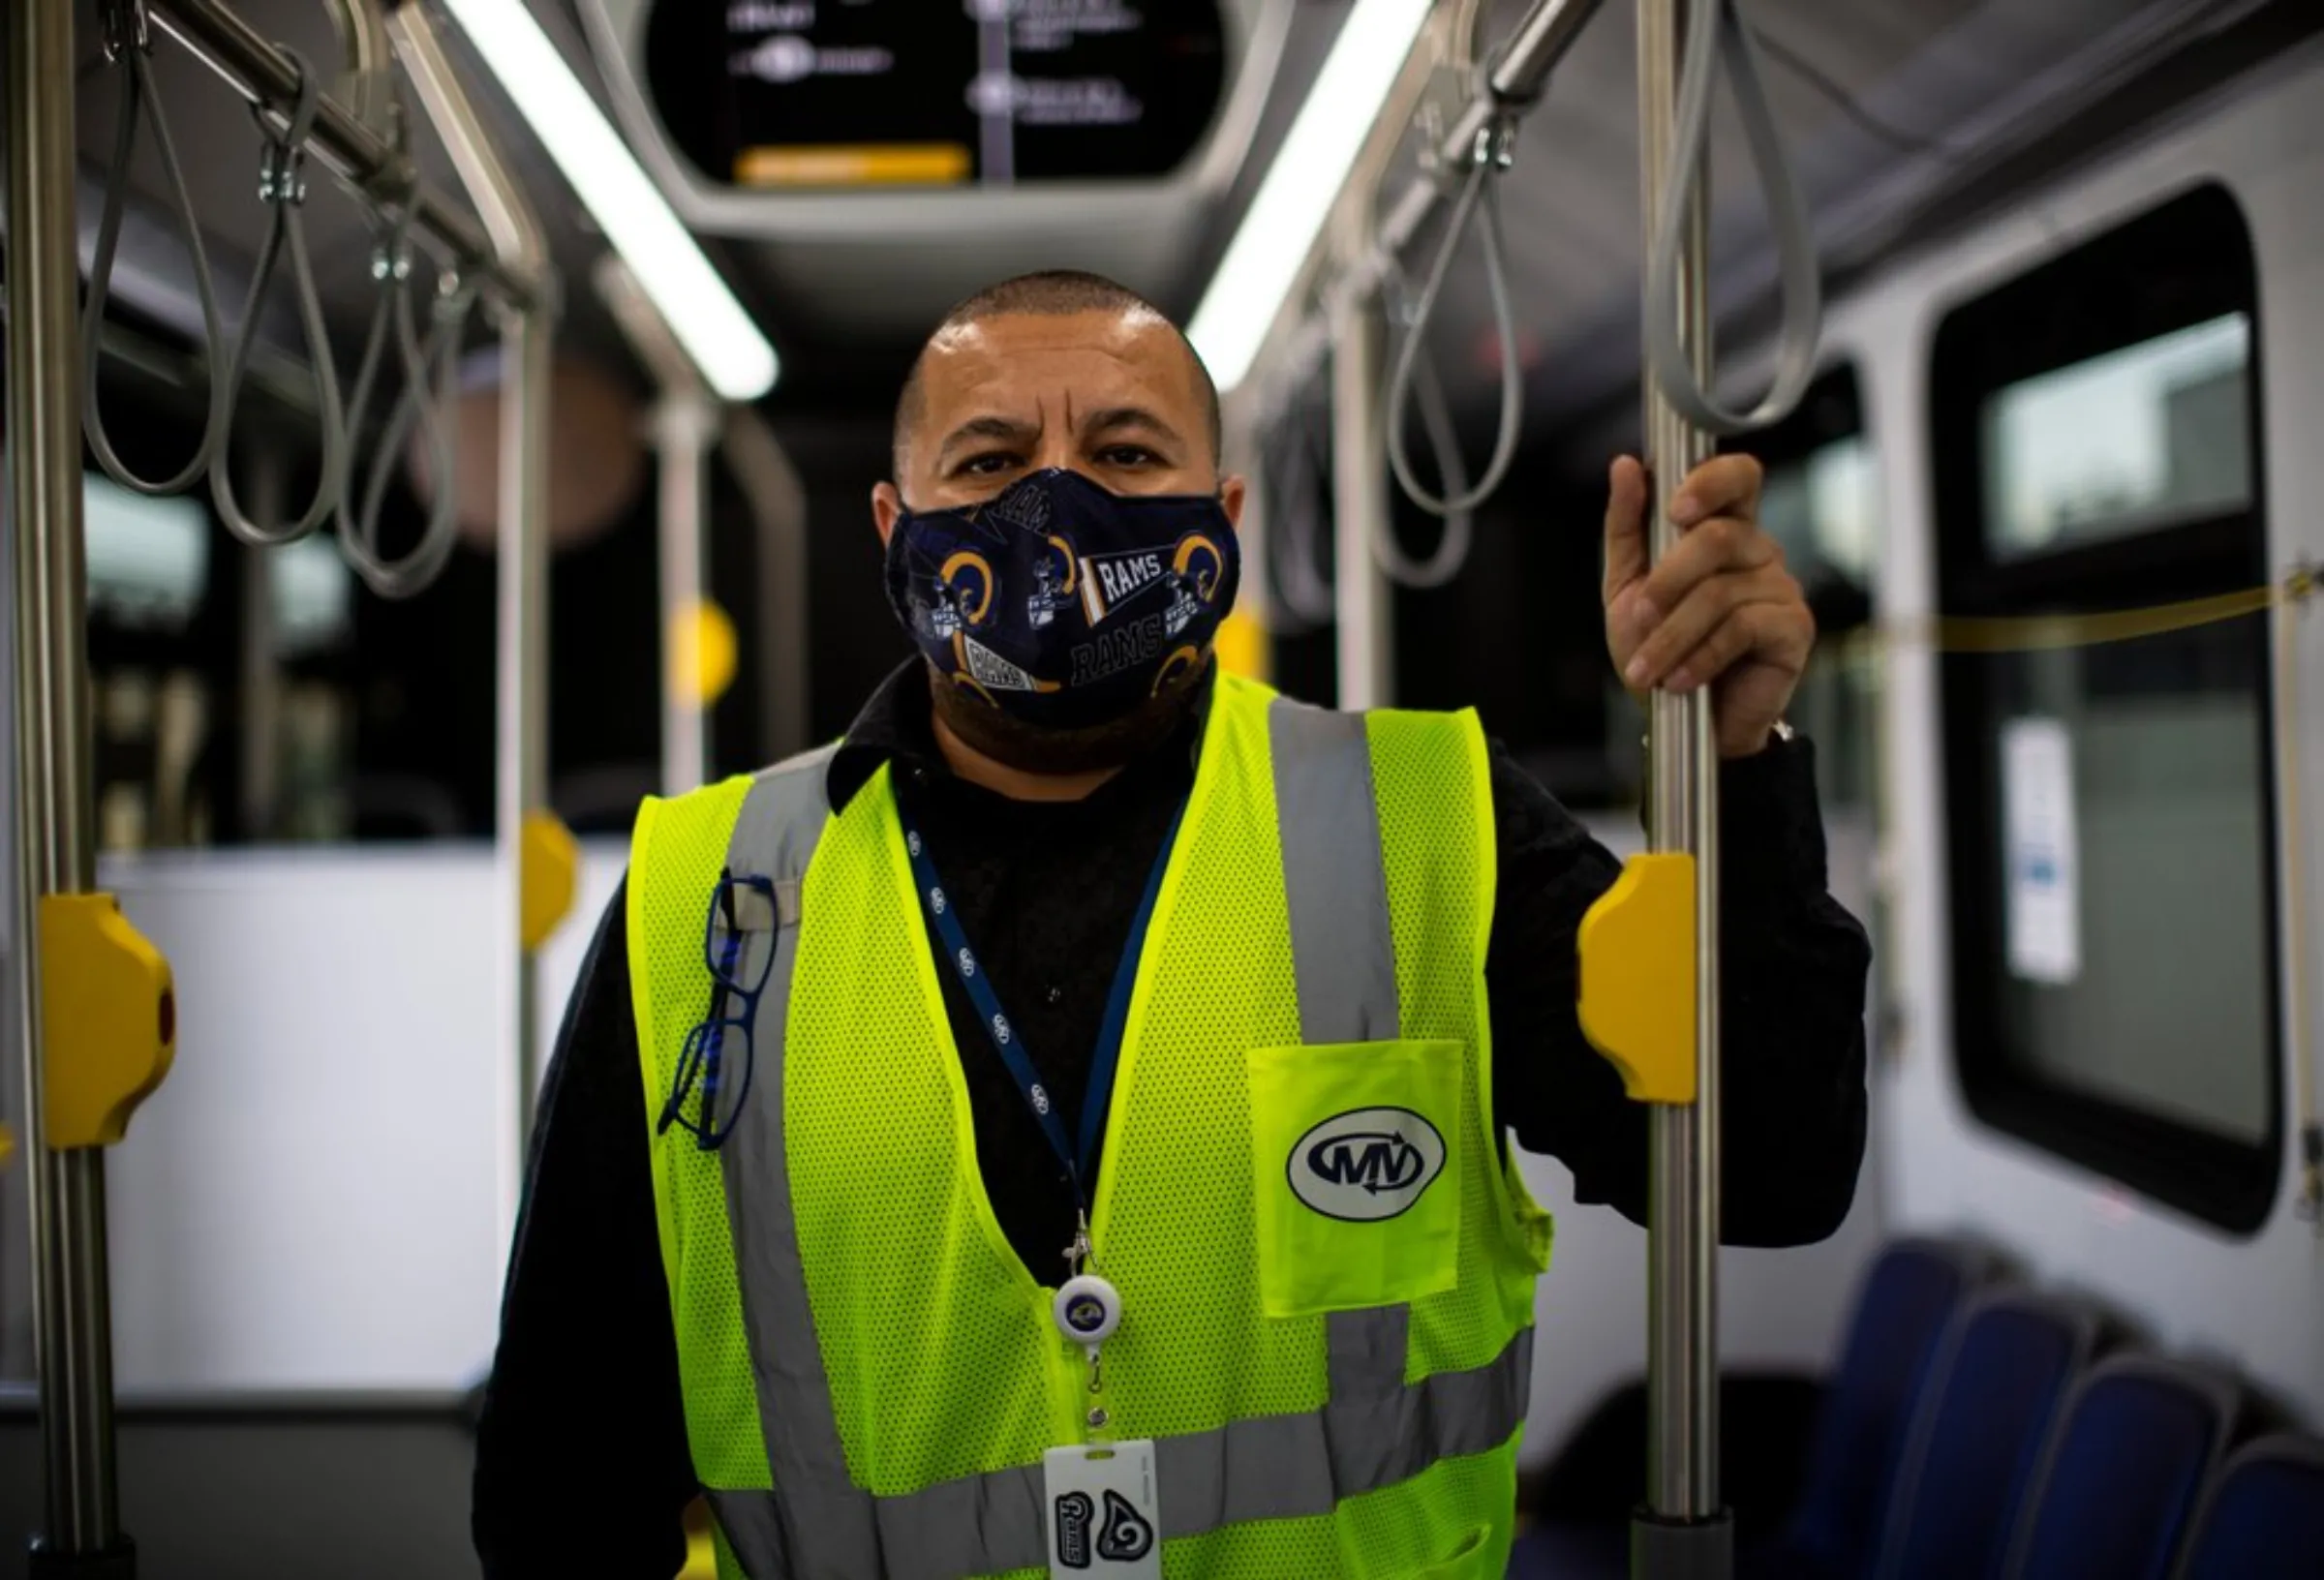 Albert Flores, a supervisor in charge of training new bus drivers, stands inside an electric bus – part of an expanding city fleet - at a depot in downtown Los Angeles, May 18, 2021